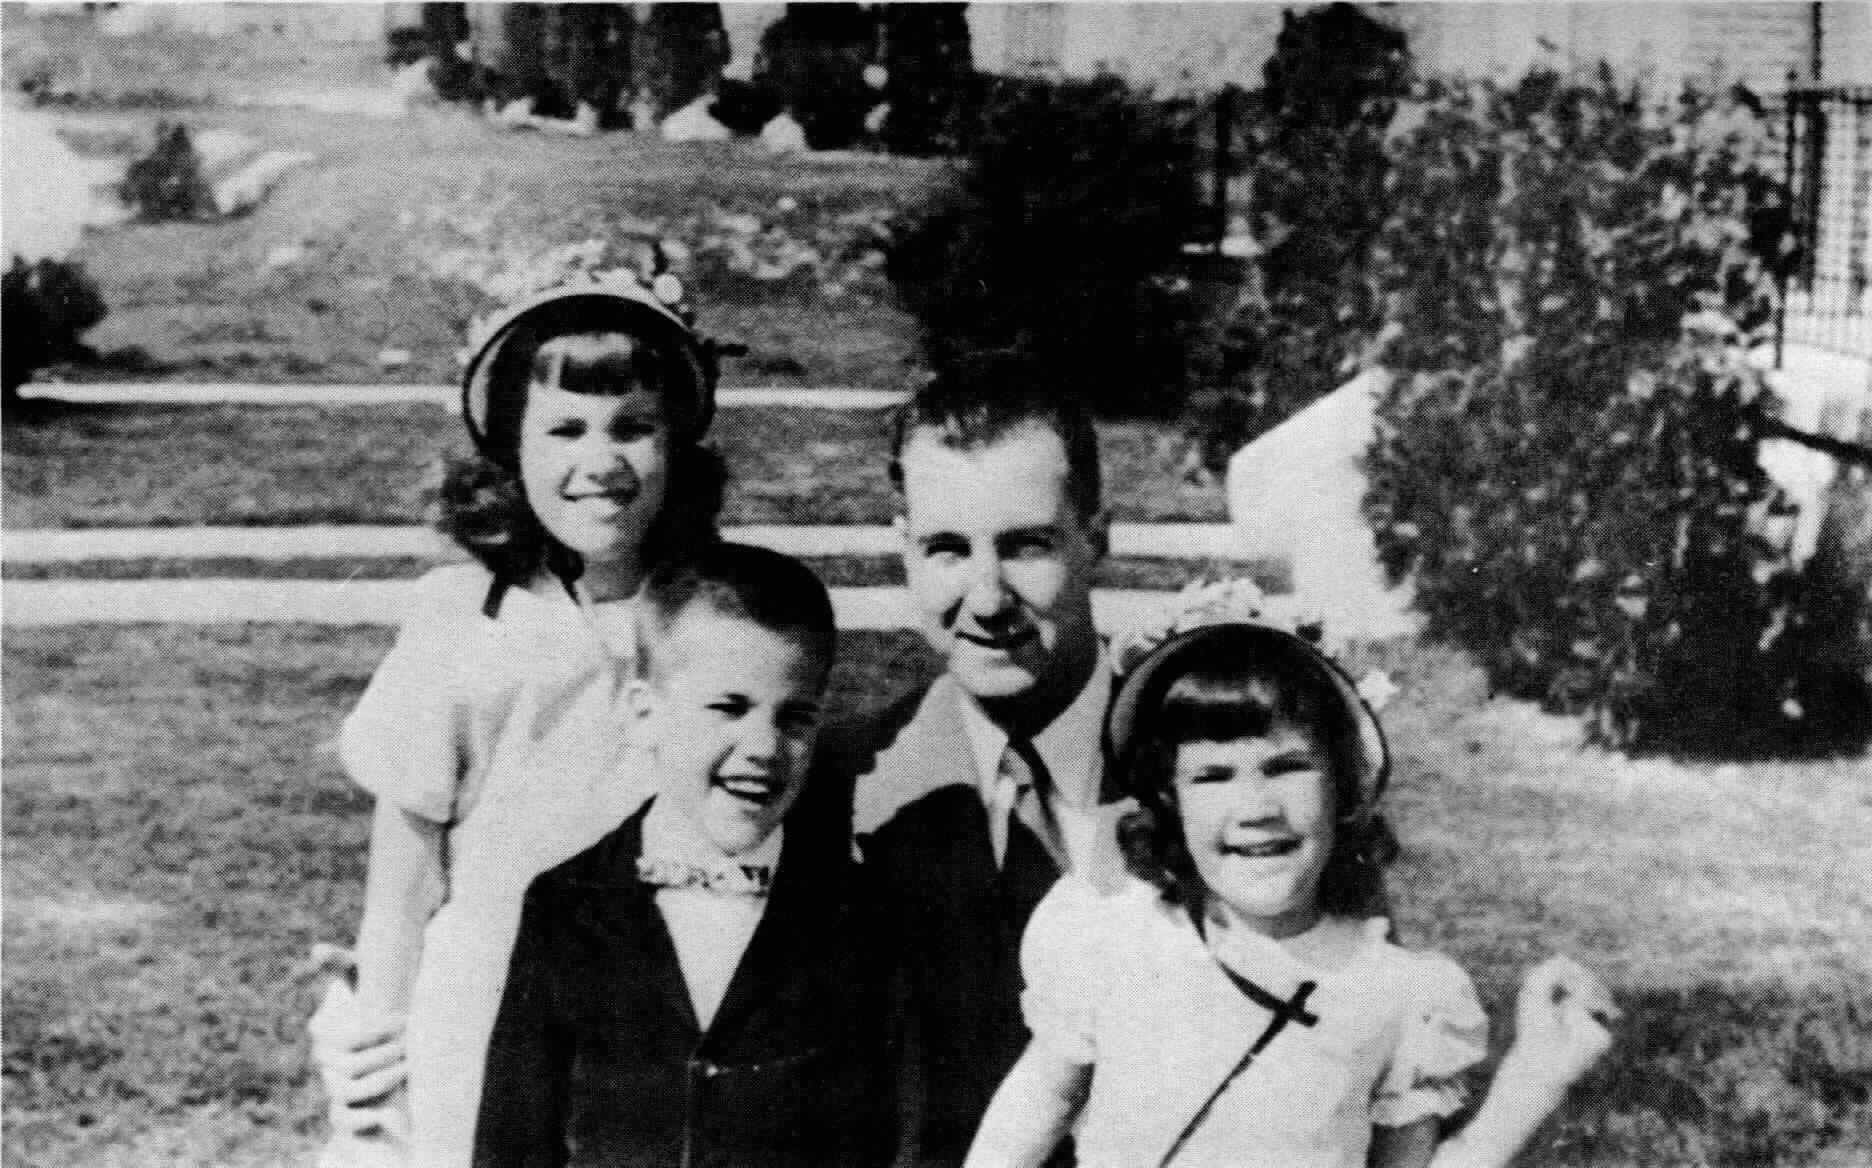 Spiro Agnew with Pamela, Randy, and Susan in 1953